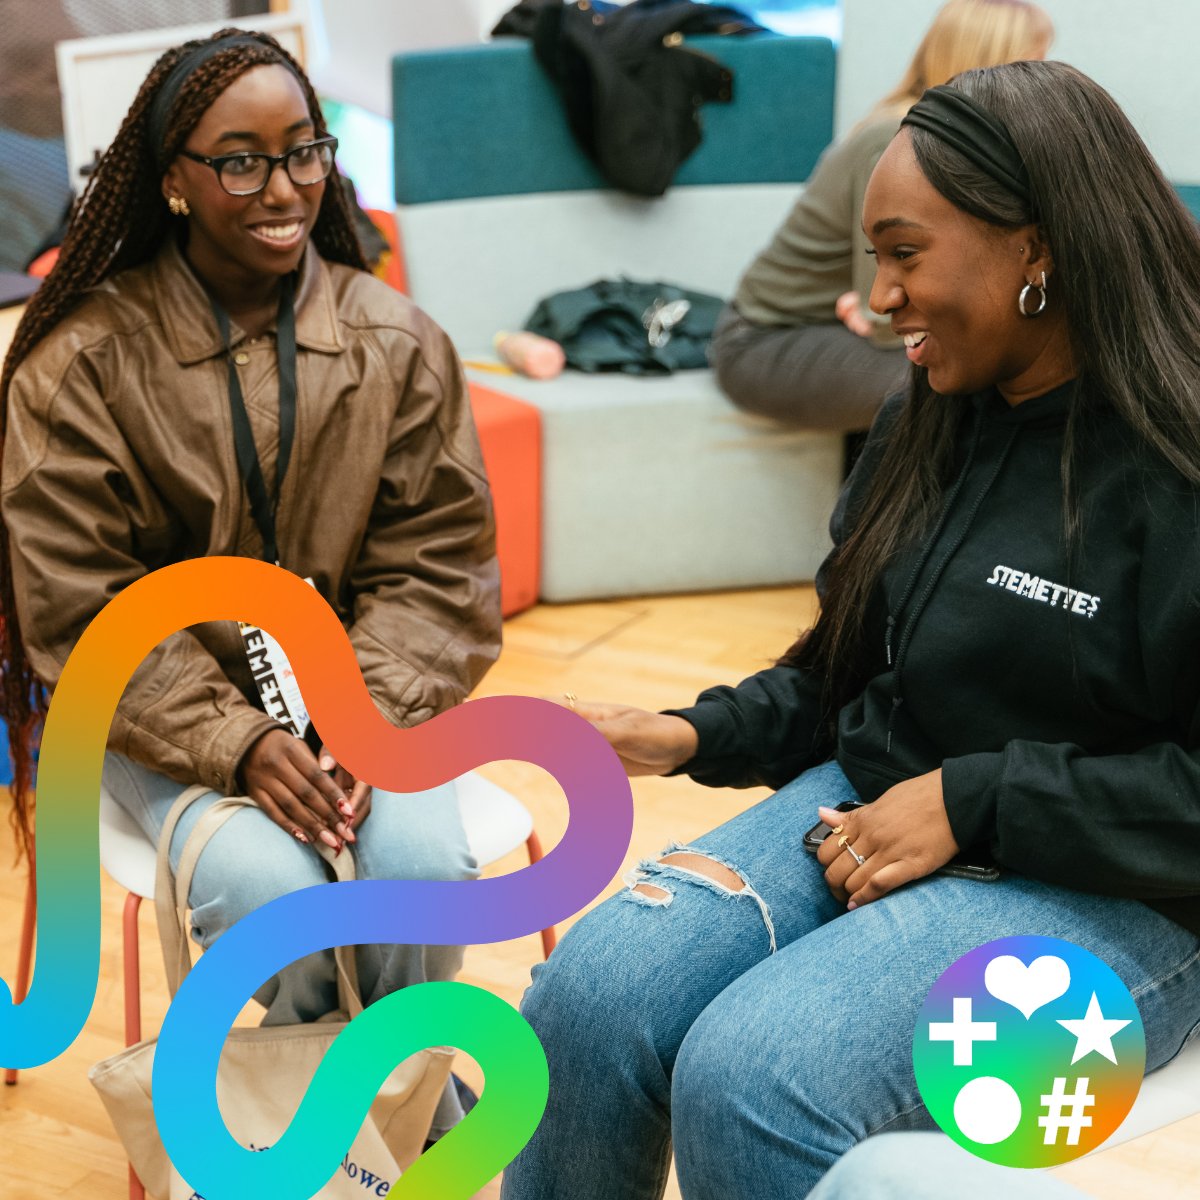 🙌 Volunteers needed for Stemettes event on 18th May 2024! 🙌 Sit on the Judging Panel at the event based in Birmingham. Interested in volunteering or want to find out more? Sign up for this opportunity on our Volunteering System here ➡️ volunteer.stemettes.org